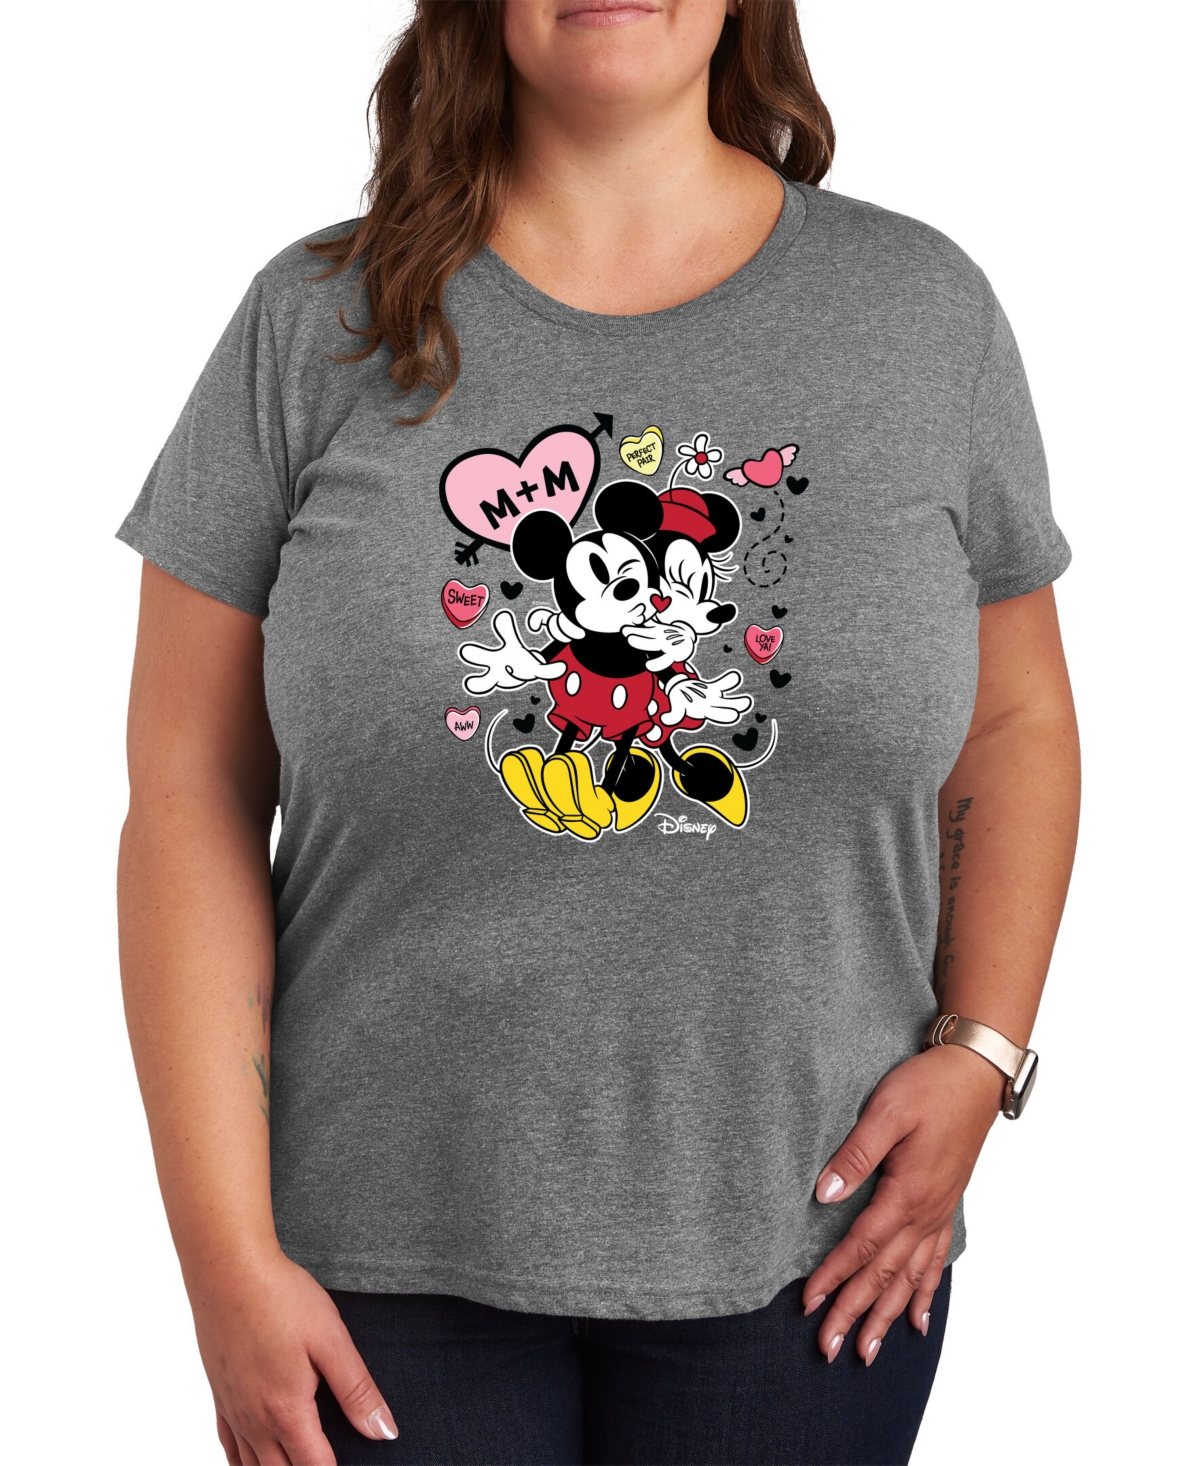 Air Waves Trendy Plus Size Disney Valentine's Day Graphic T-shirt - Gray